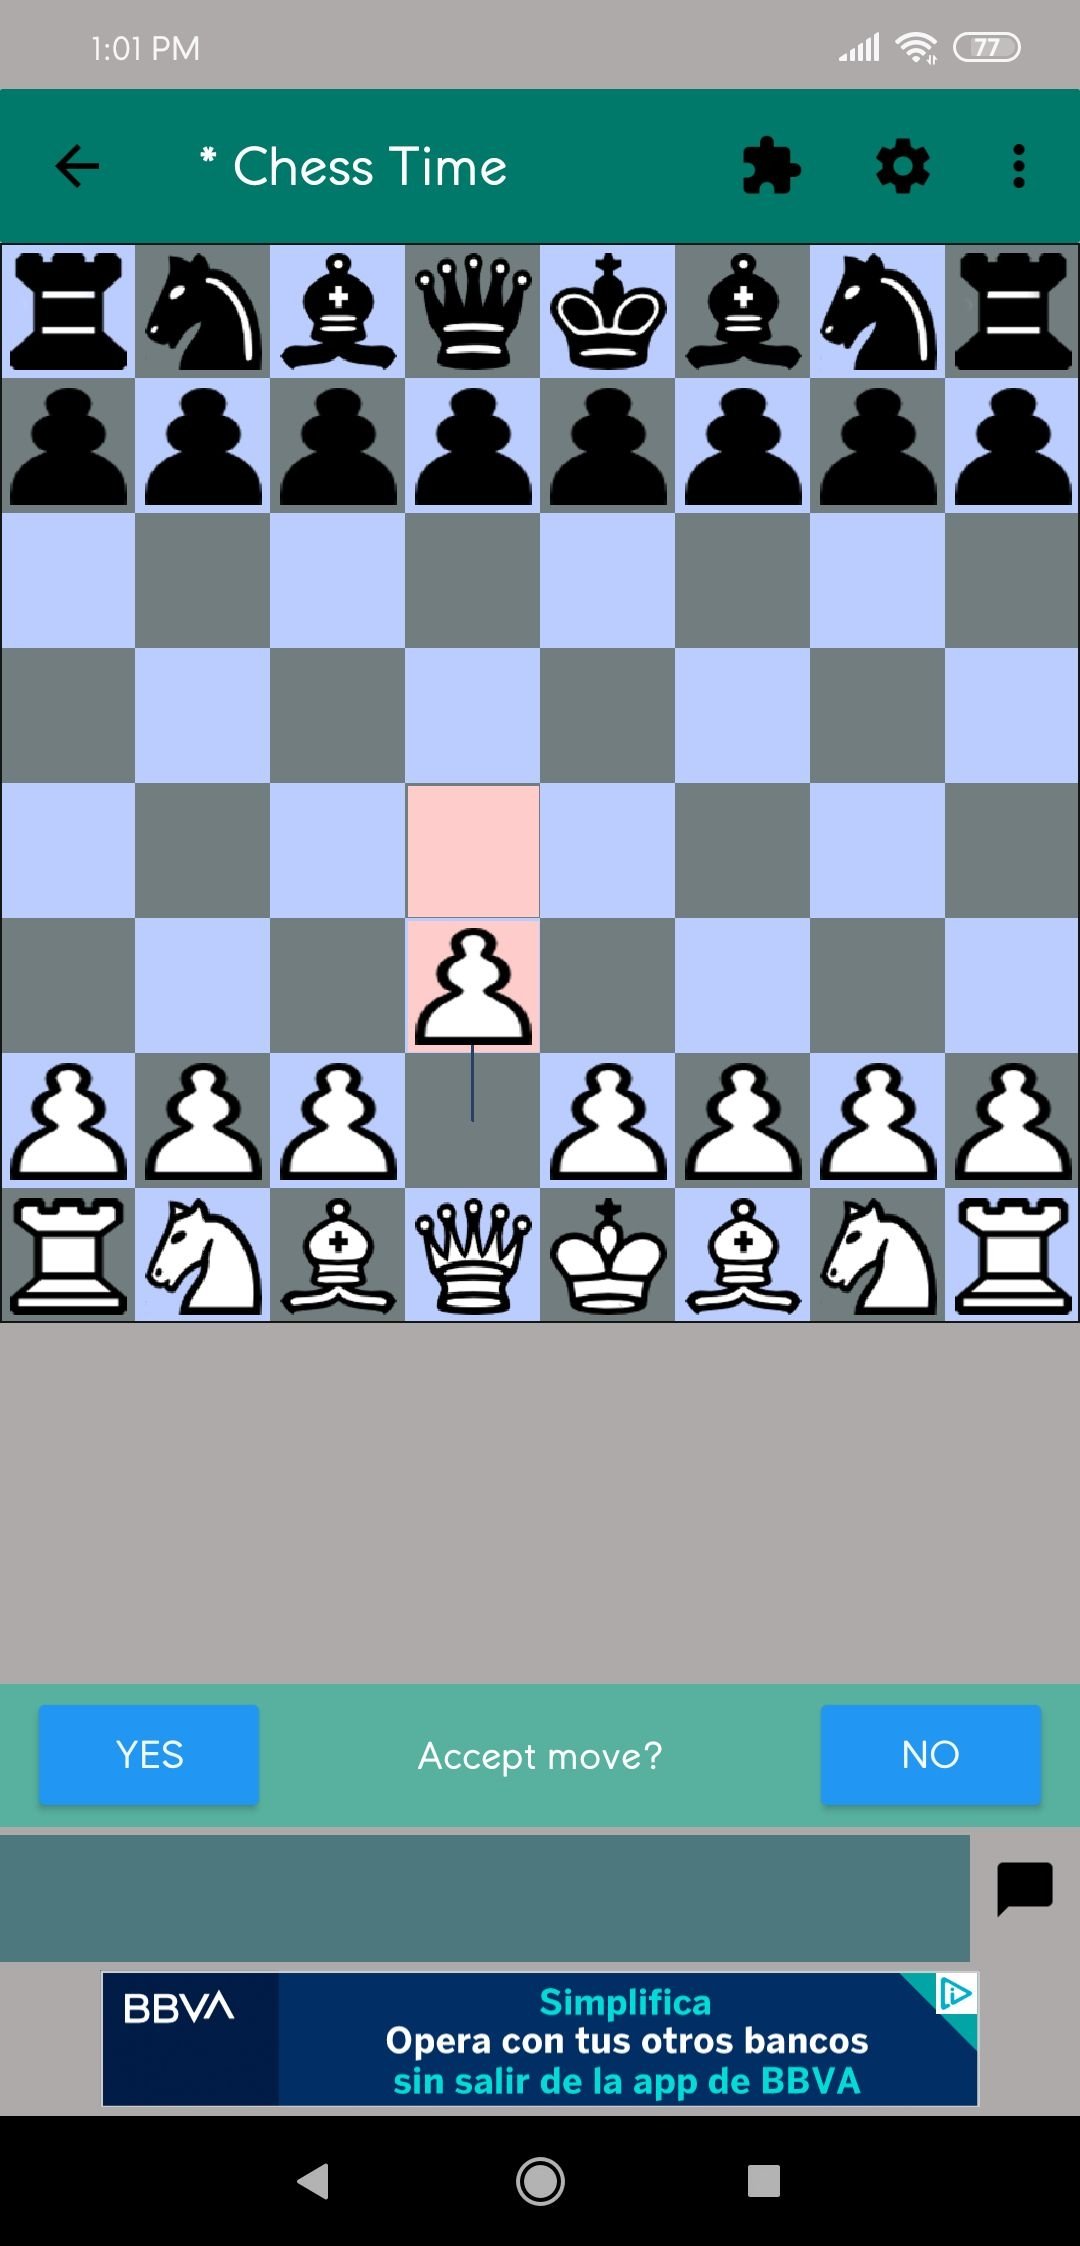 chess.time